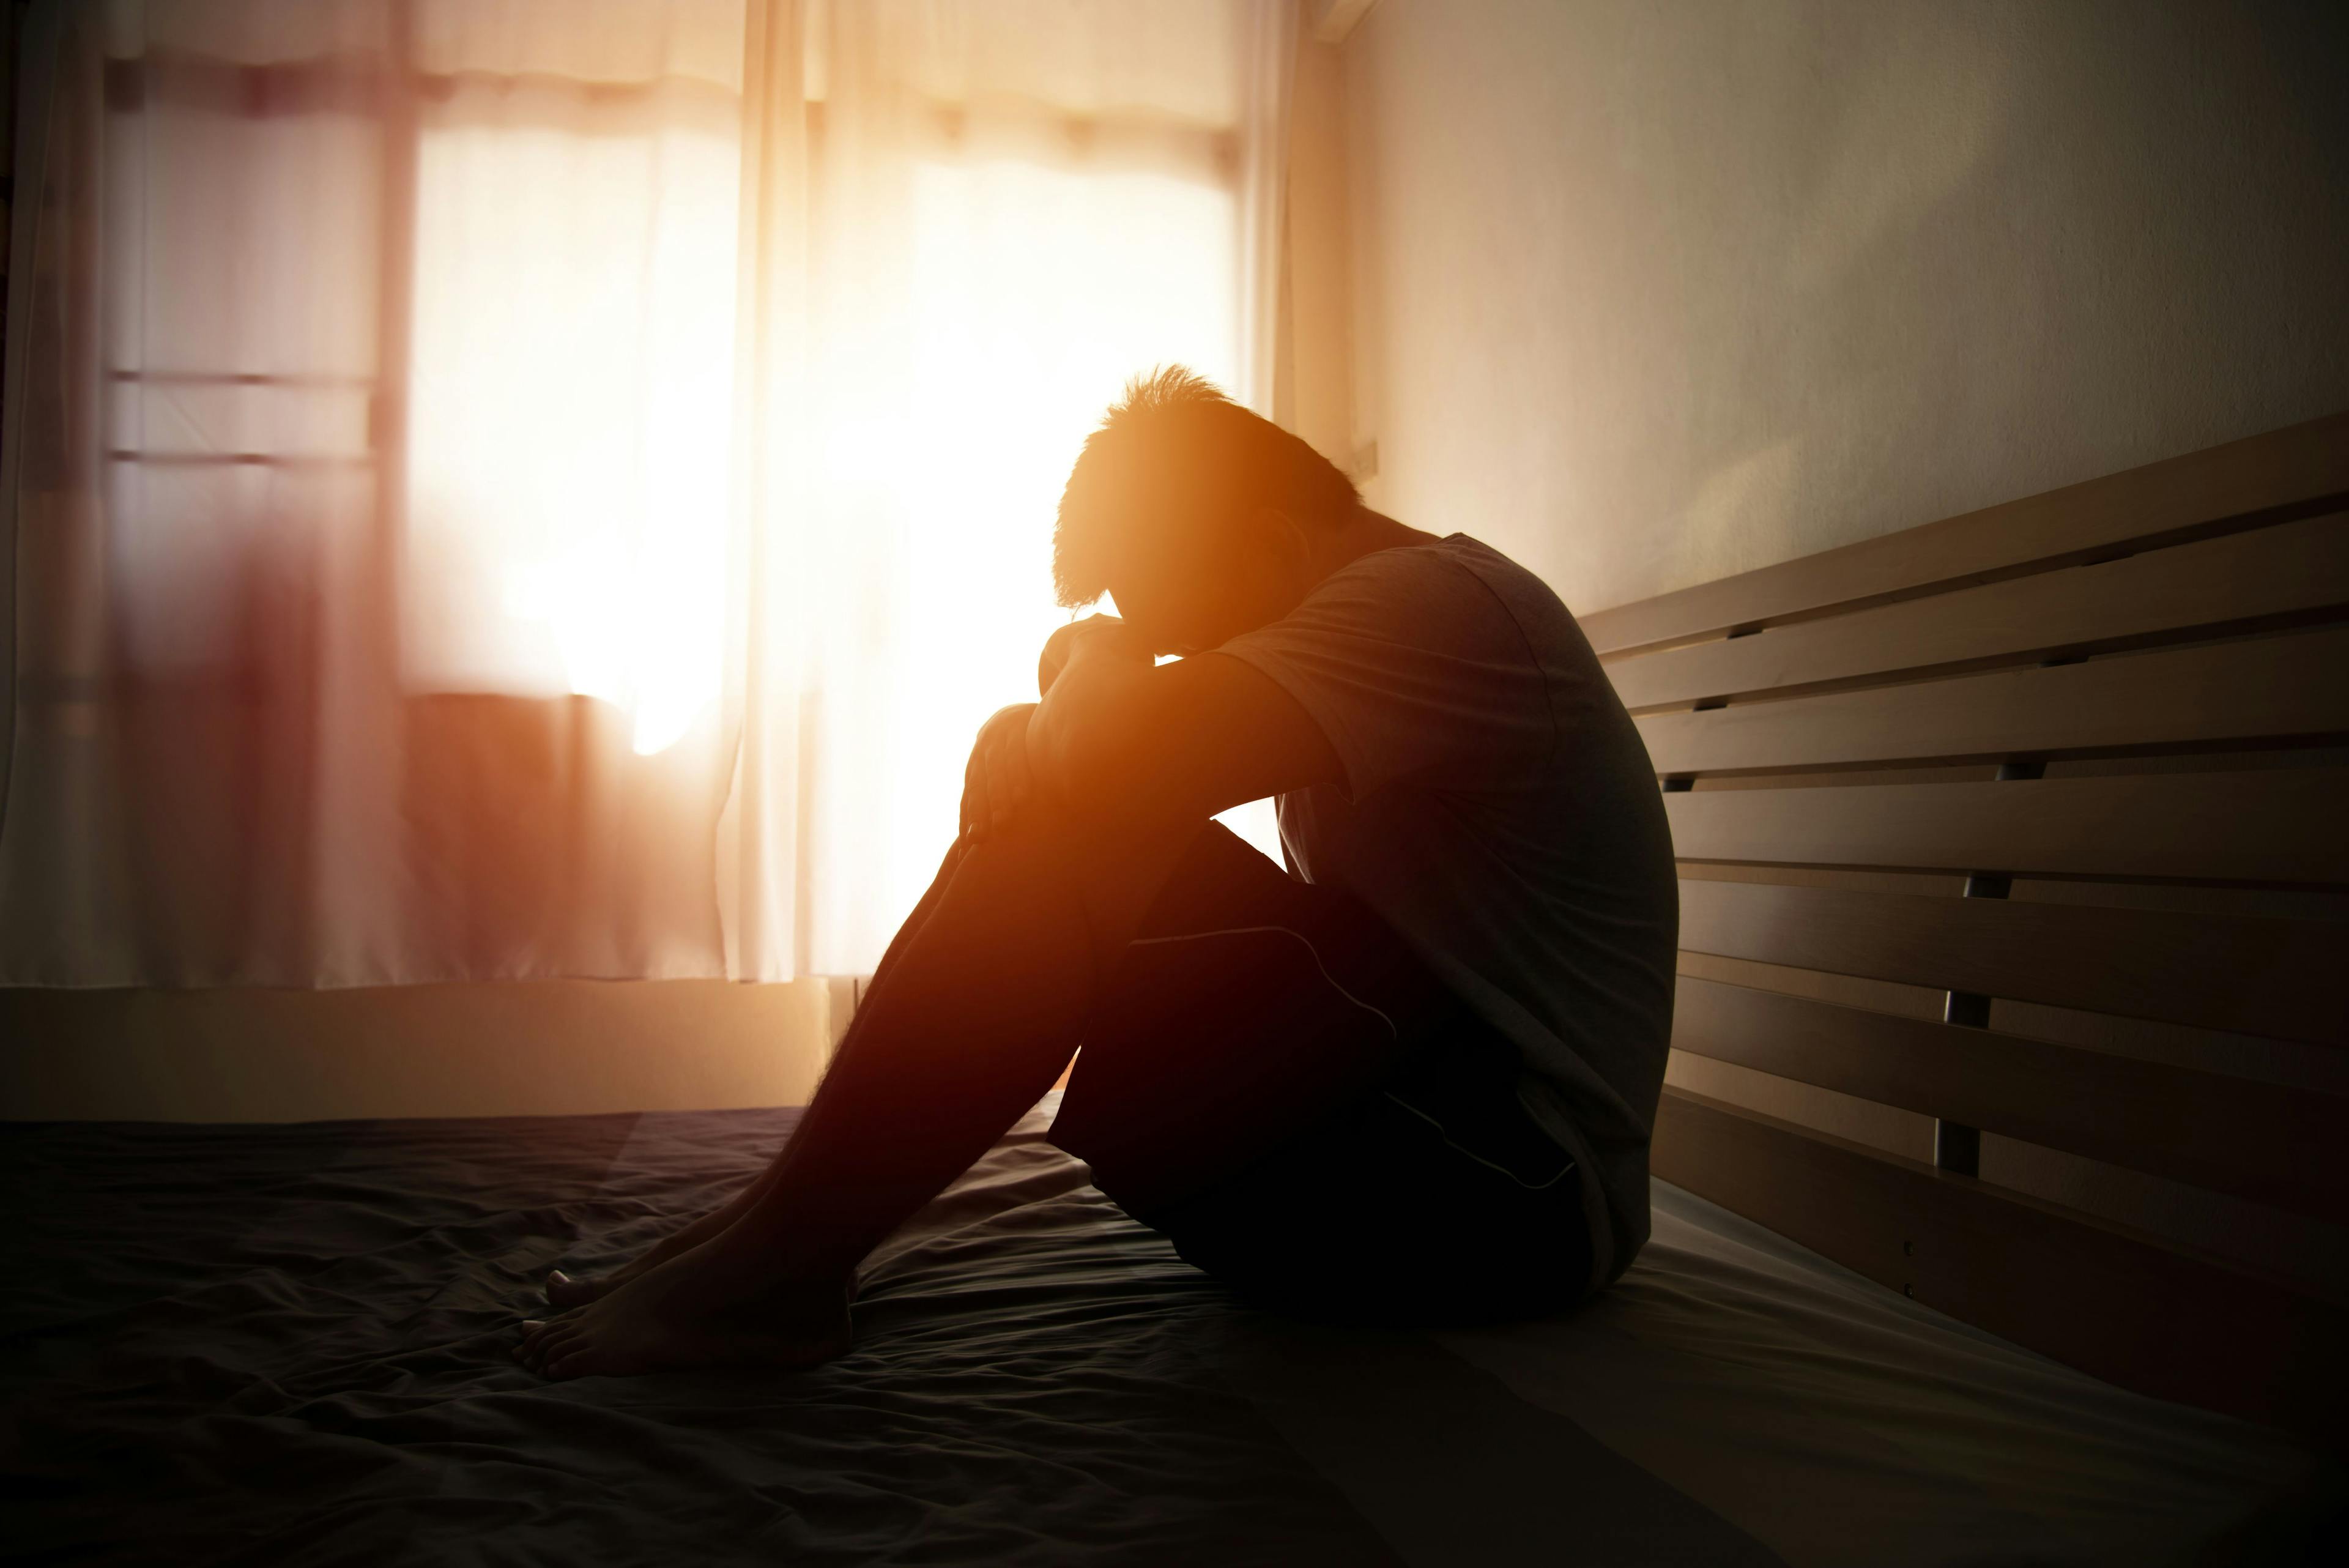 Rates of depression increased during the COVID-19 pandemic. | image credit: kwanchaift - stock.adobe.com